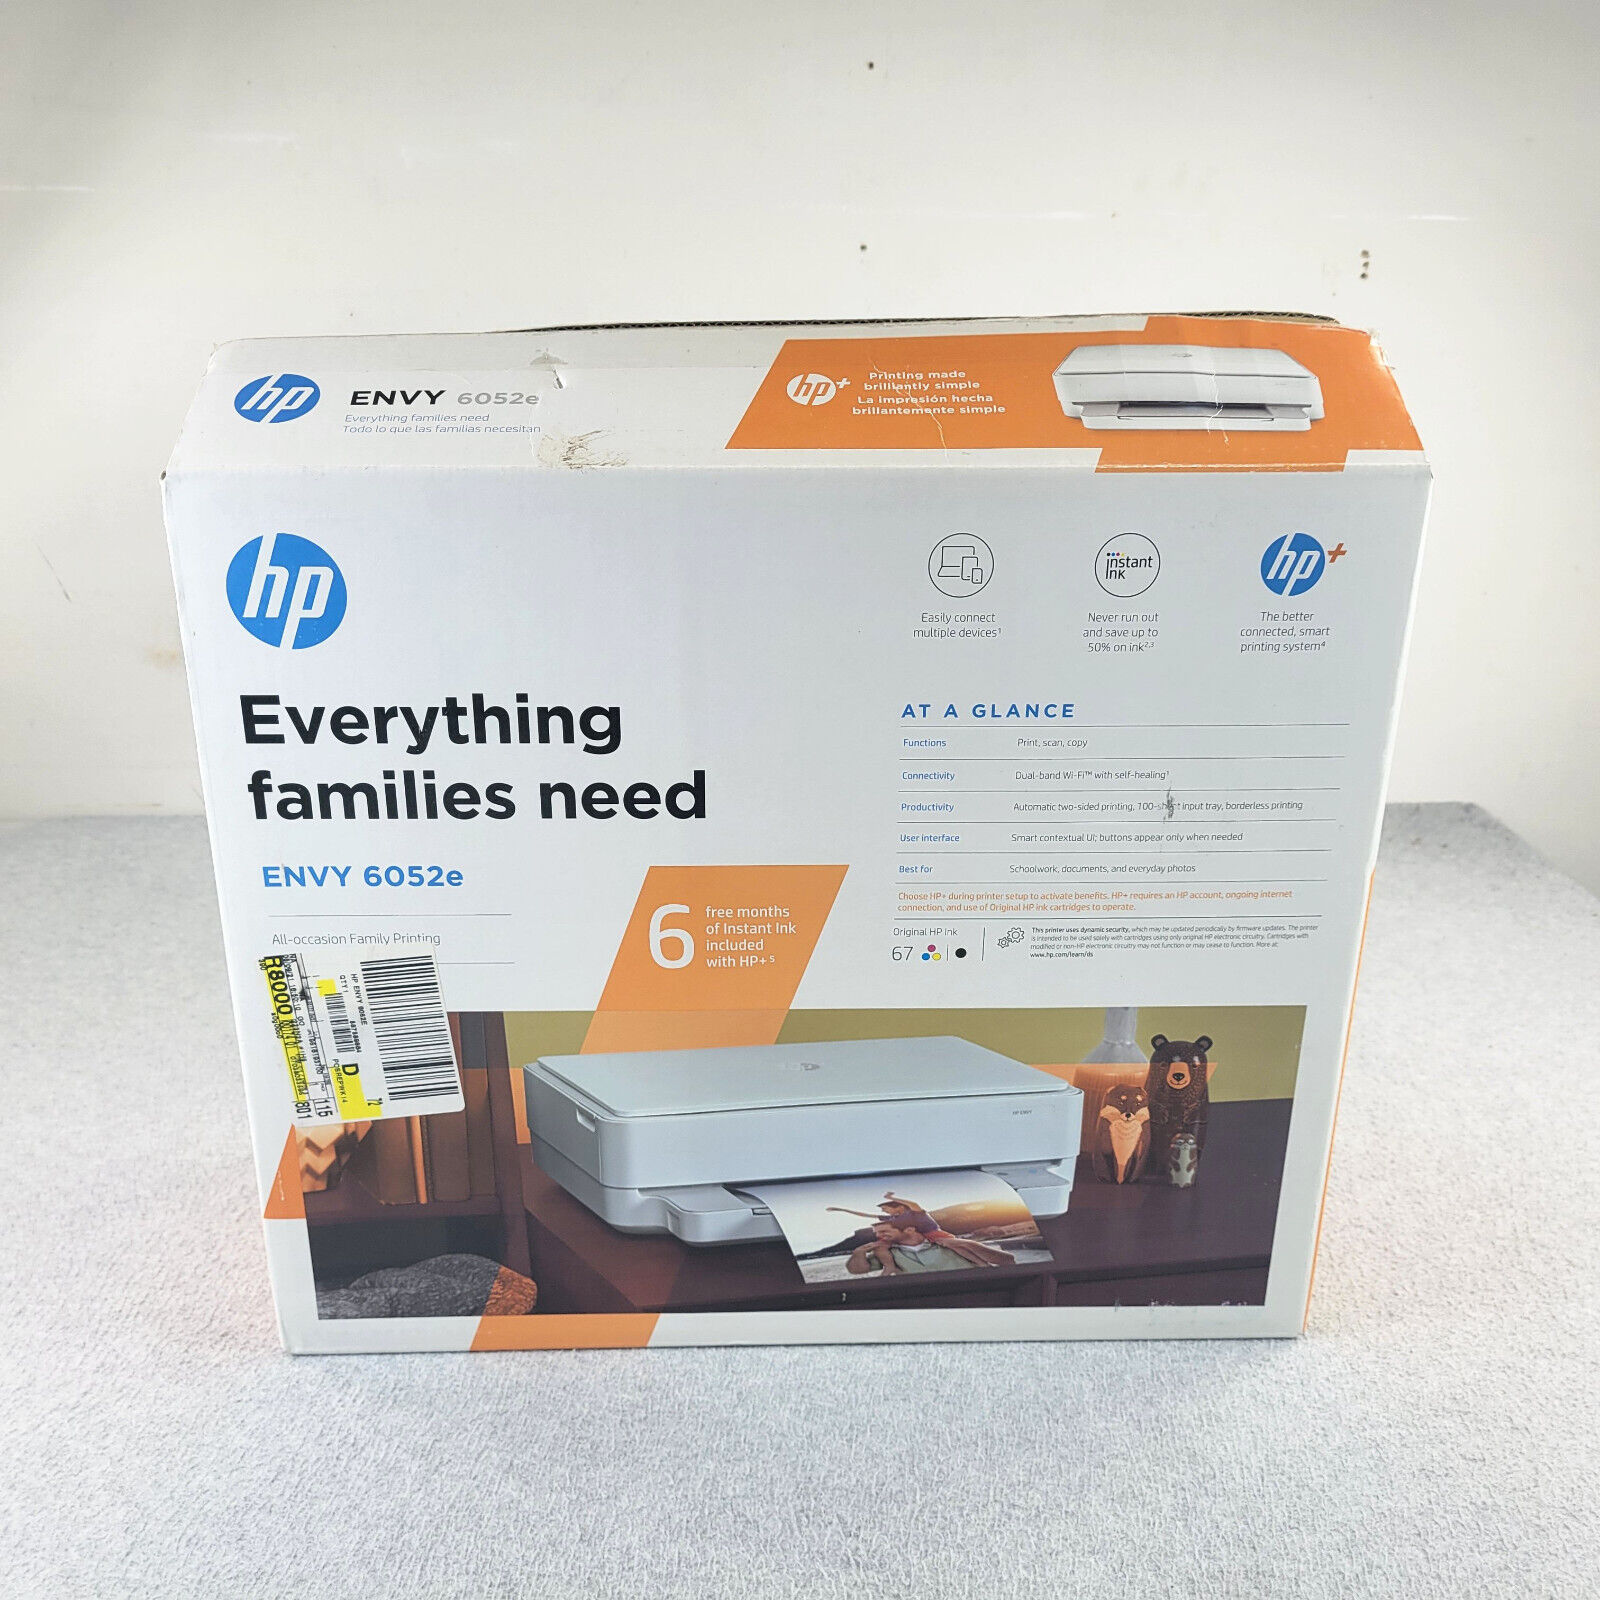 HP ENVY 6052e Inkjet Color Printer All in One Wireless Scan Copy Tested No Ink